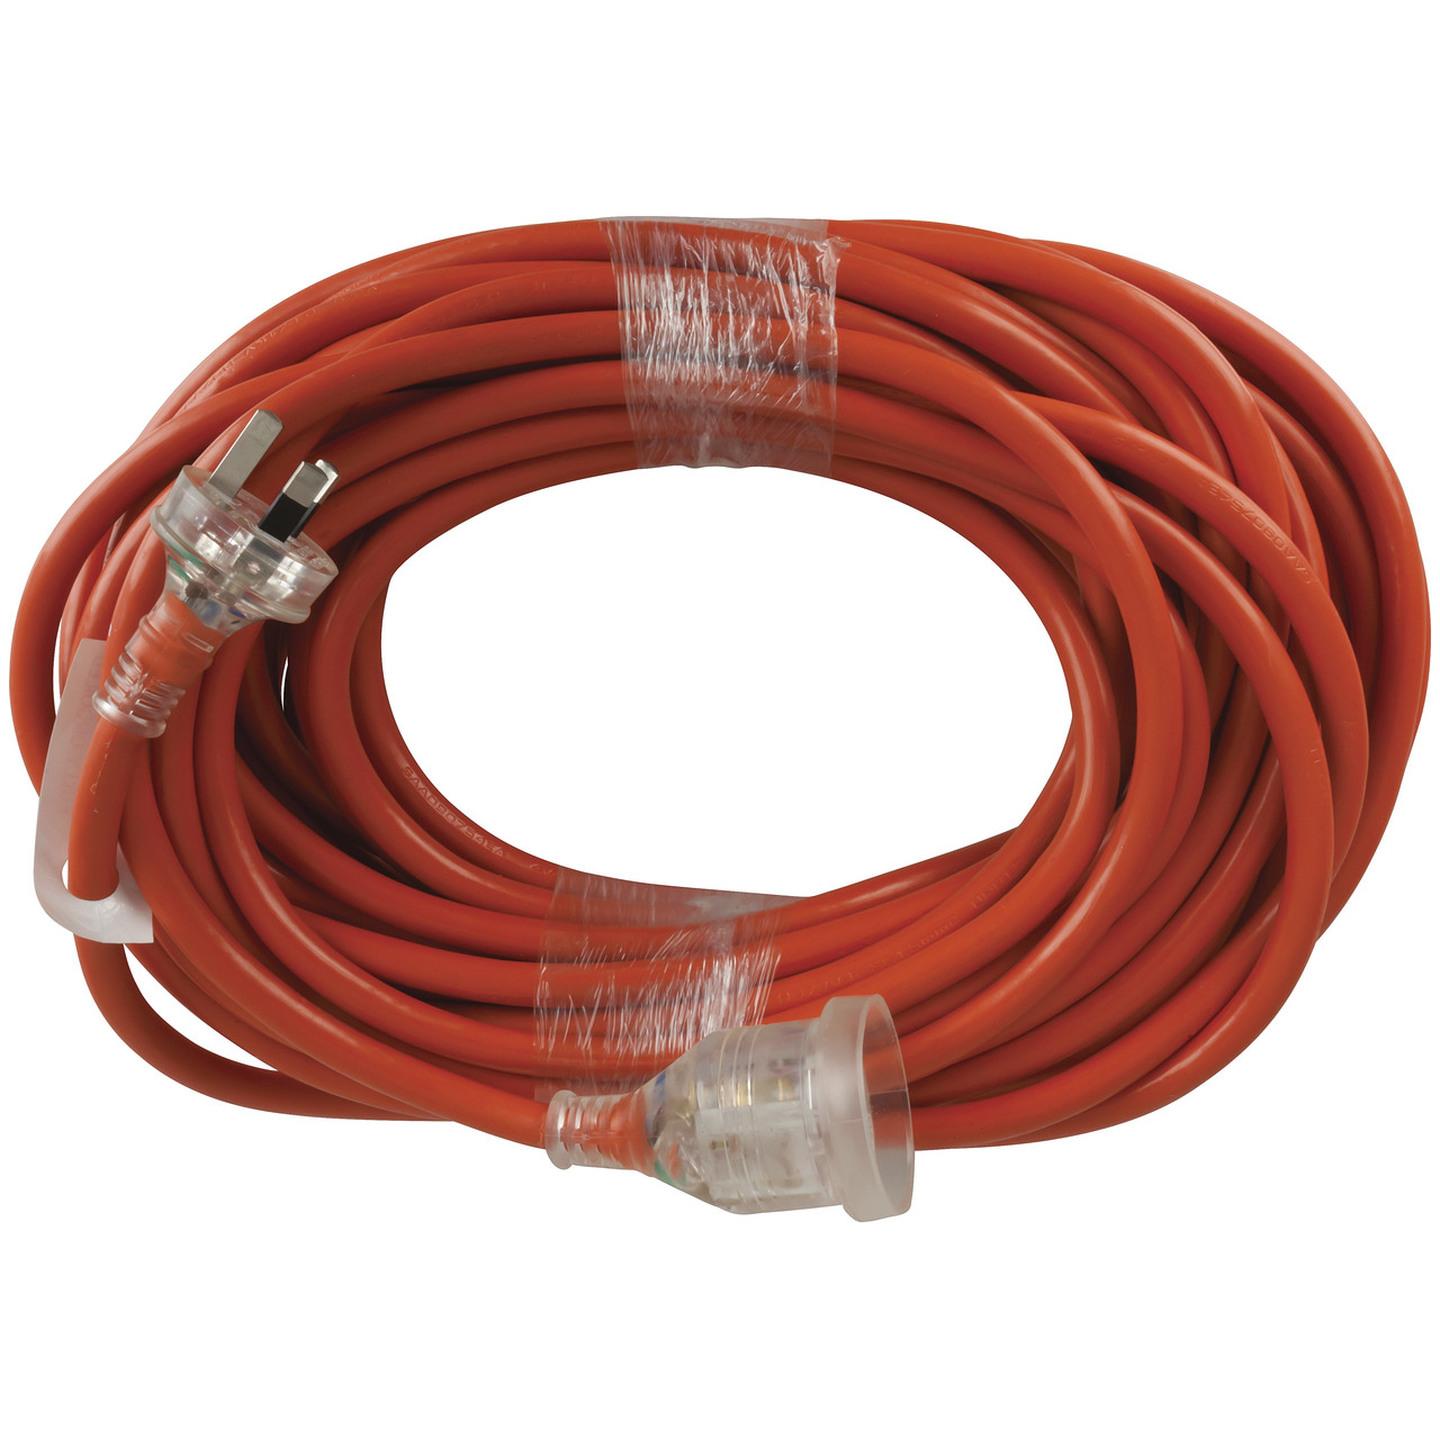 20m Heavy Duty Mains Extension Cable